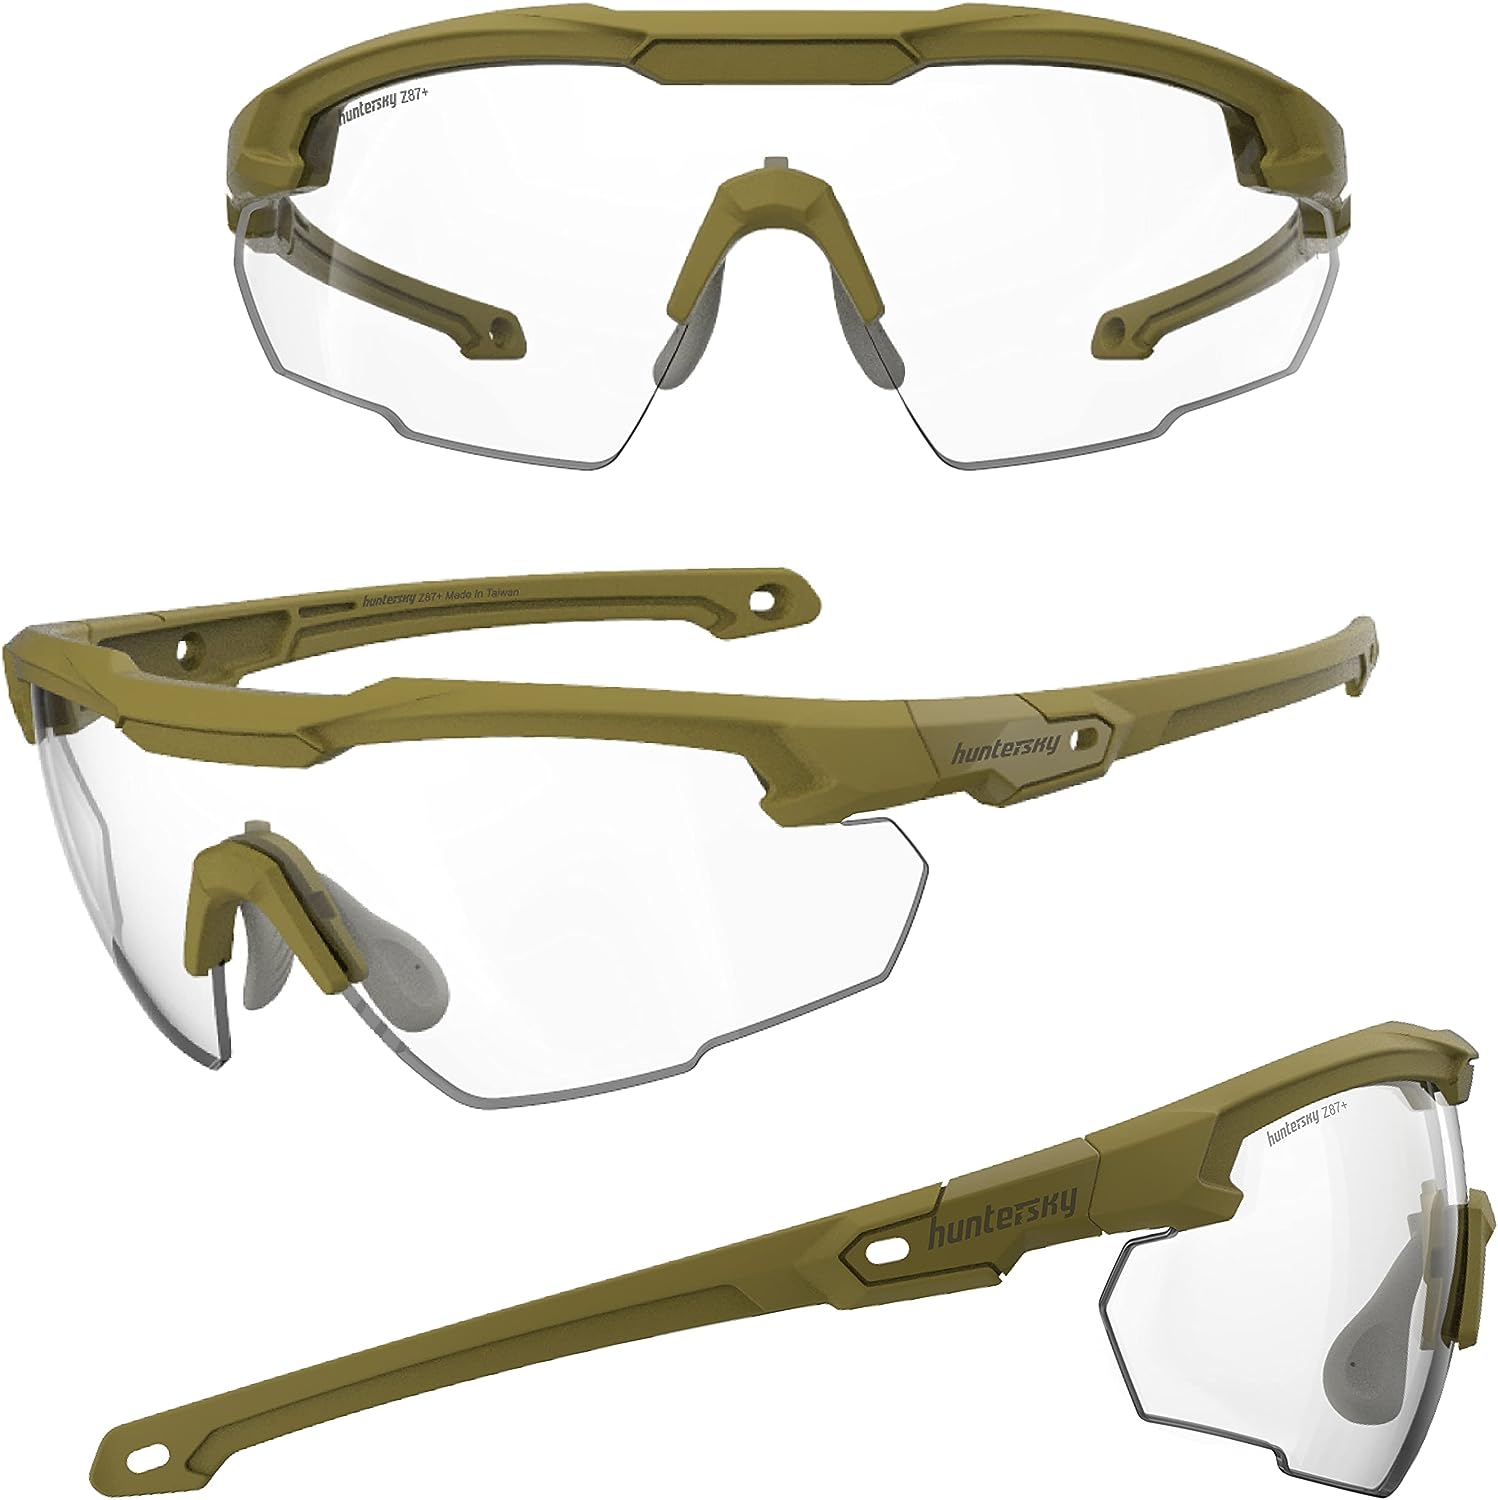 HUNTERSKY DISCOVER YOUR WORLD! HTS Anti Fog Shooting Safety Glasses for men, Military Grade Gun range Hunting Airsoft Riding